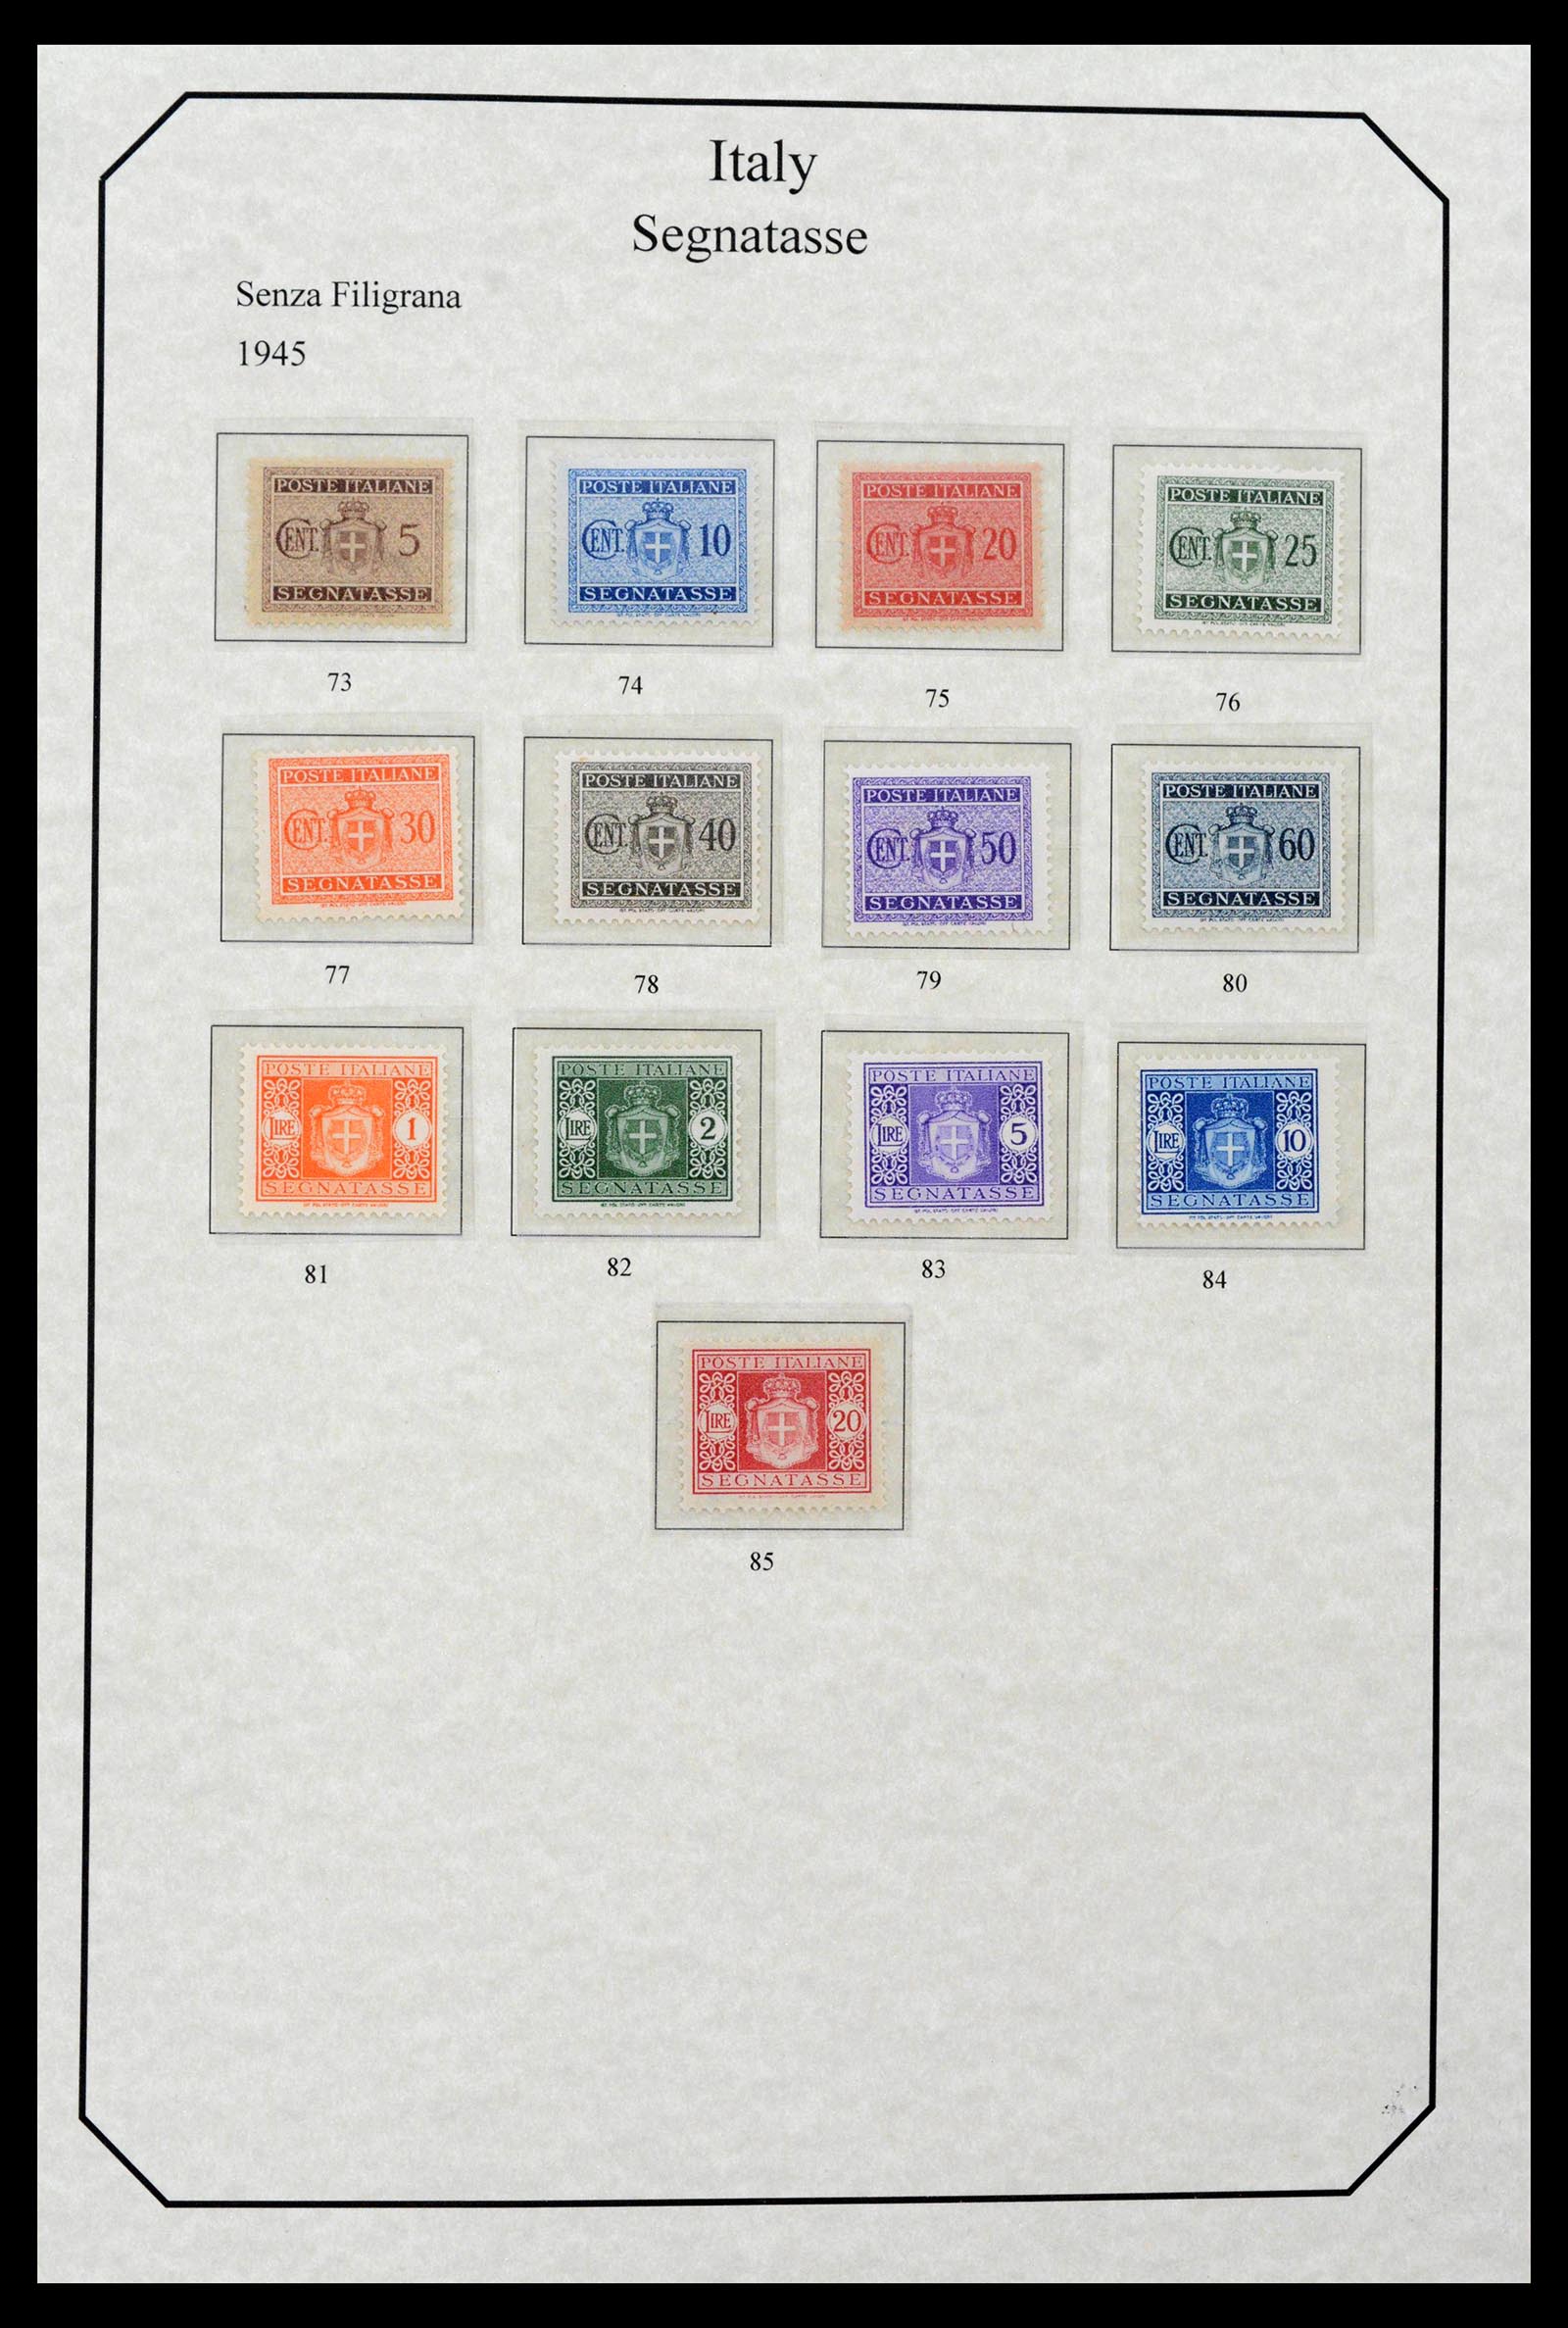 39022 0012 - Stamp collection 39022 Italy postage dues 1861-2000.